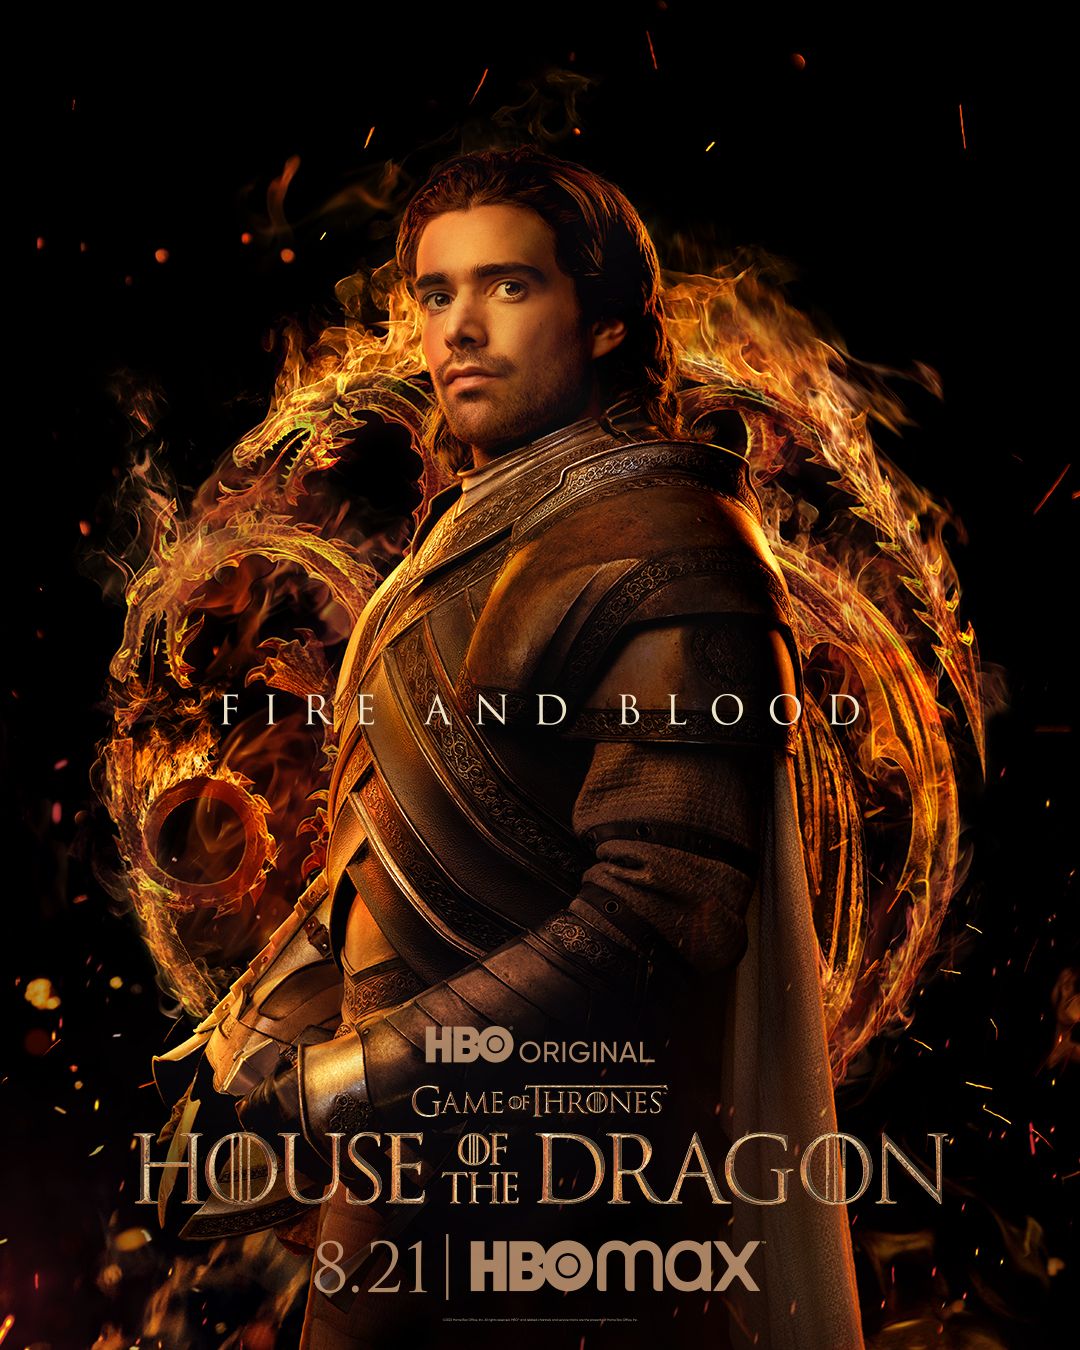 Criston Cole in House of the Dragon poster